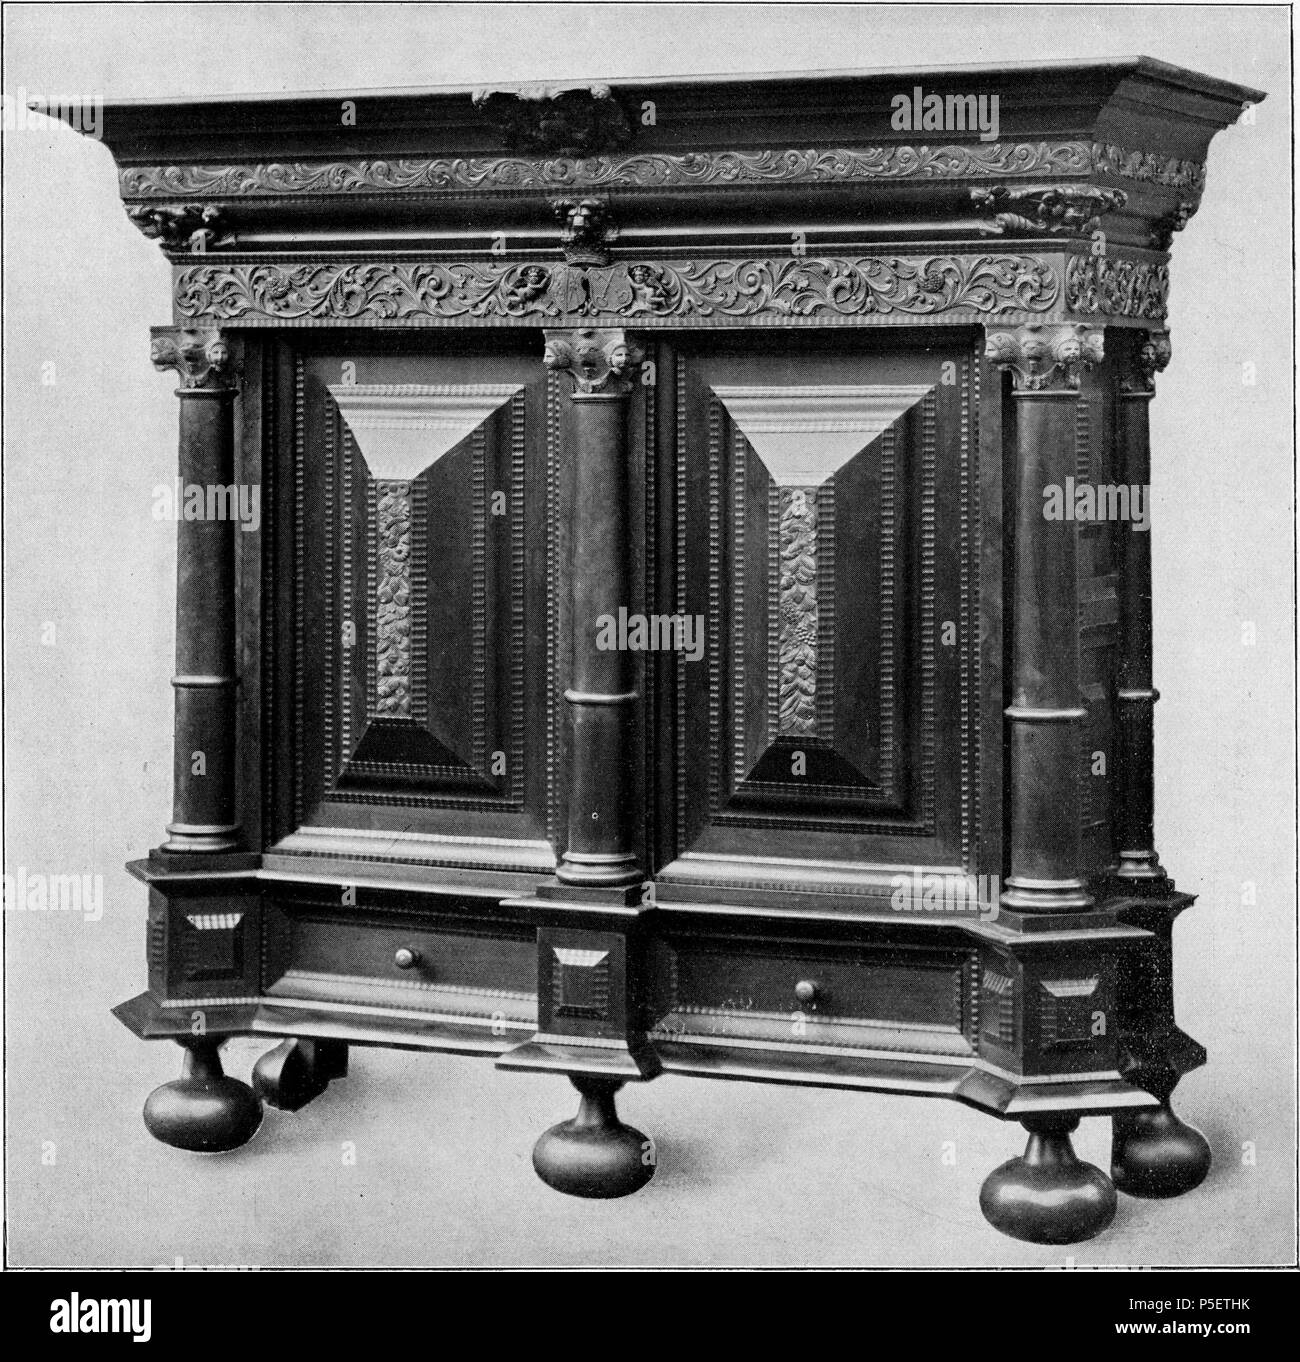 Armoire Black and White Stock Photos & Images - Alamy